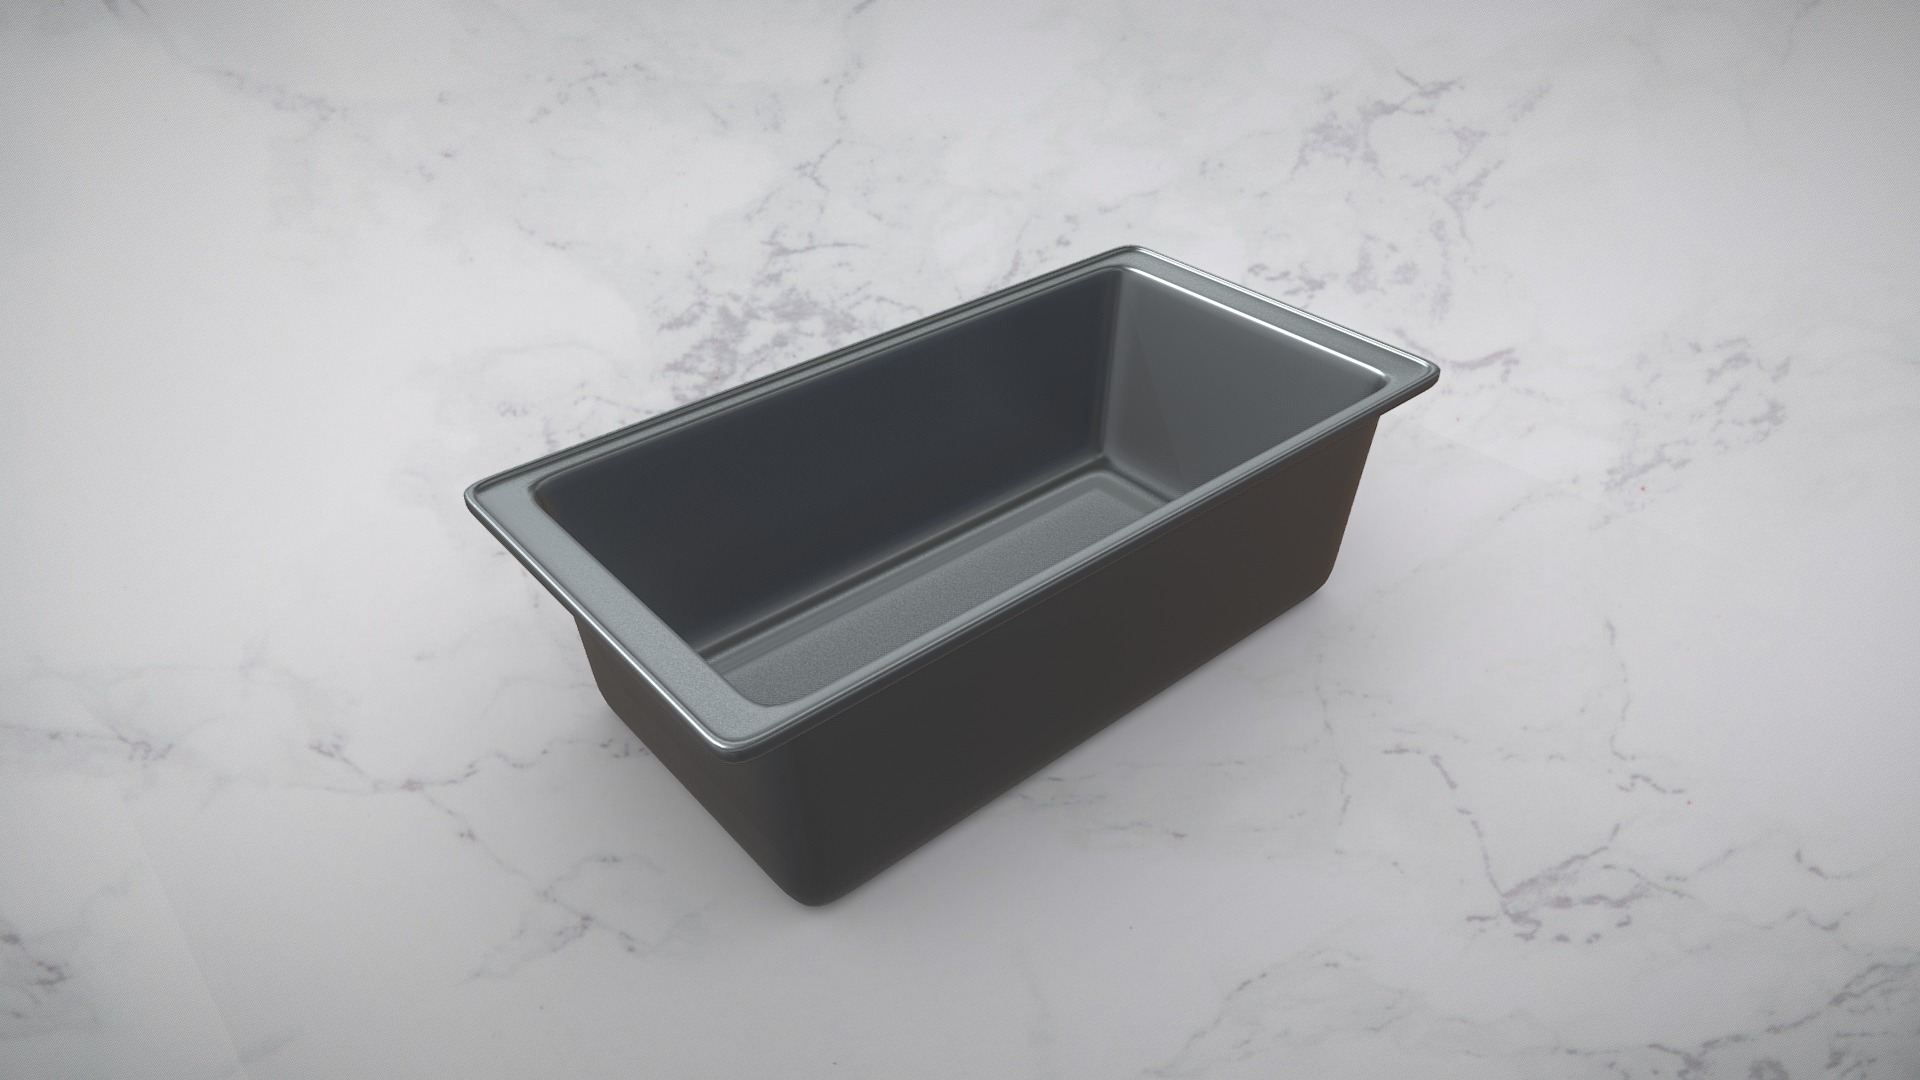 3D model Anodized Aluminium Style Bread Loaf Baking Pan - This is a 3D model of the Anodized Aluminium Style Bread Loaf Baking Pan. The 3D model is about a black and white cube on a white surface.